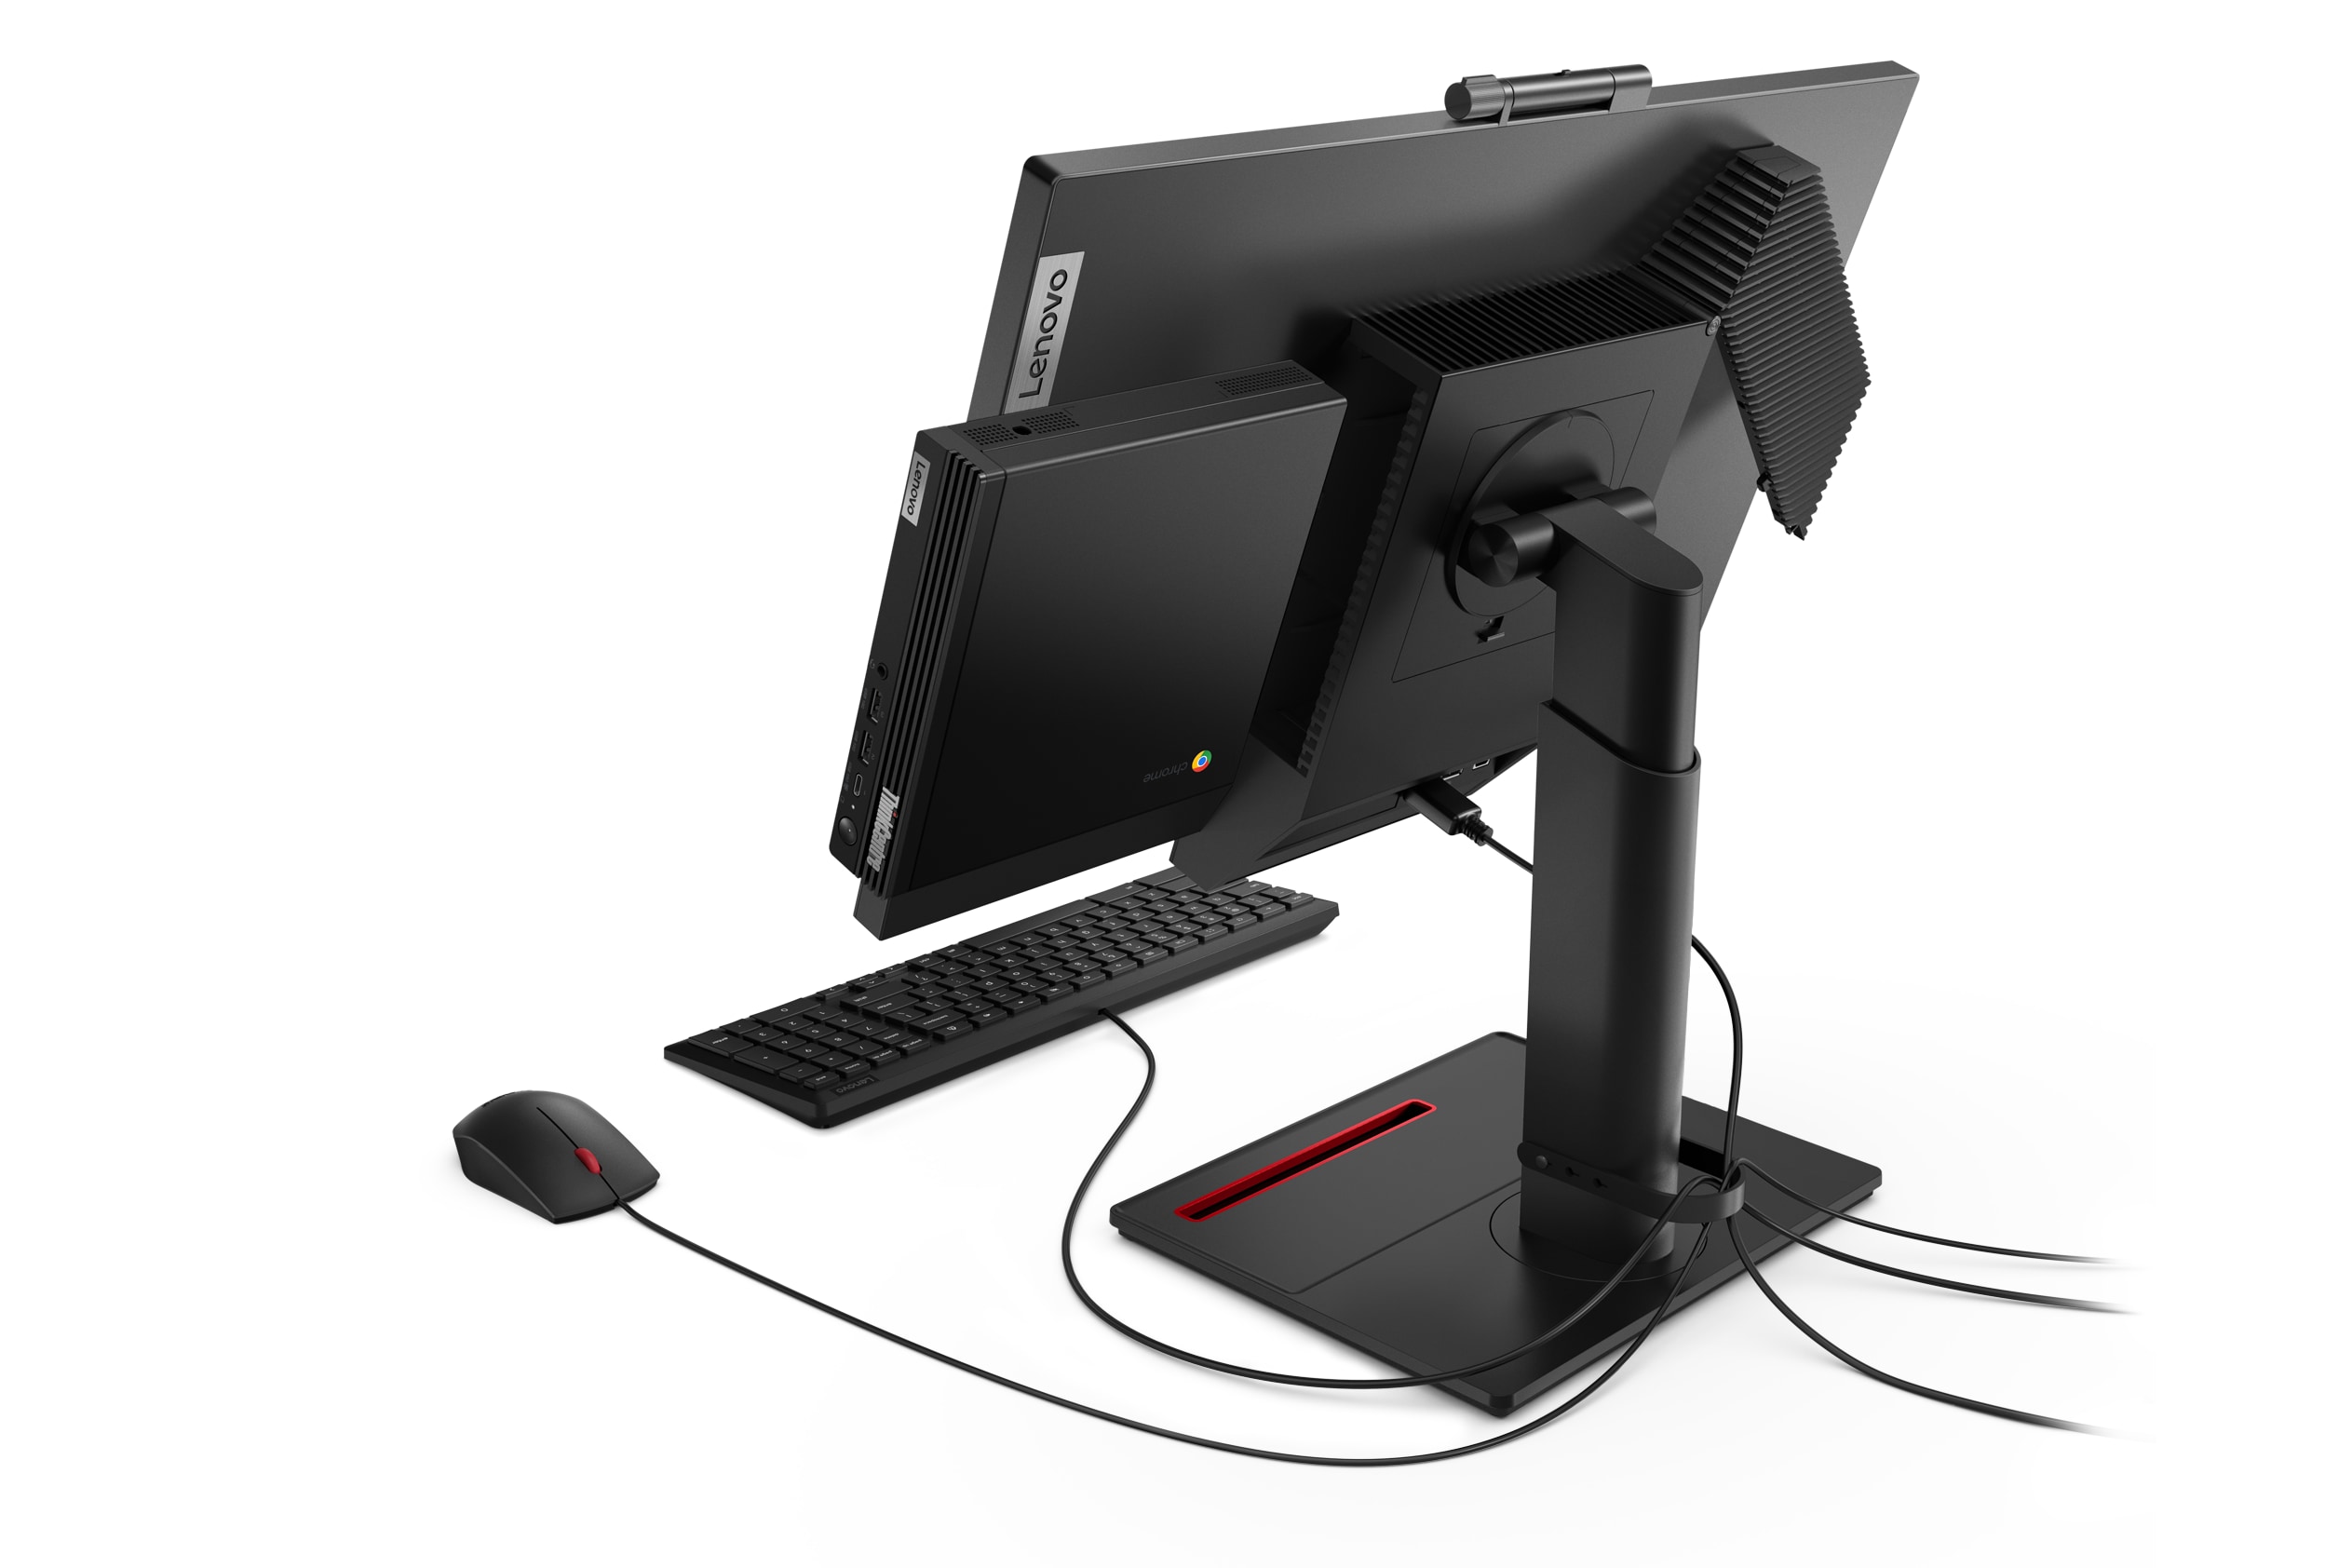 Lenovo's ThinkCentre M60q Chromebox can be mounted on a monitor.